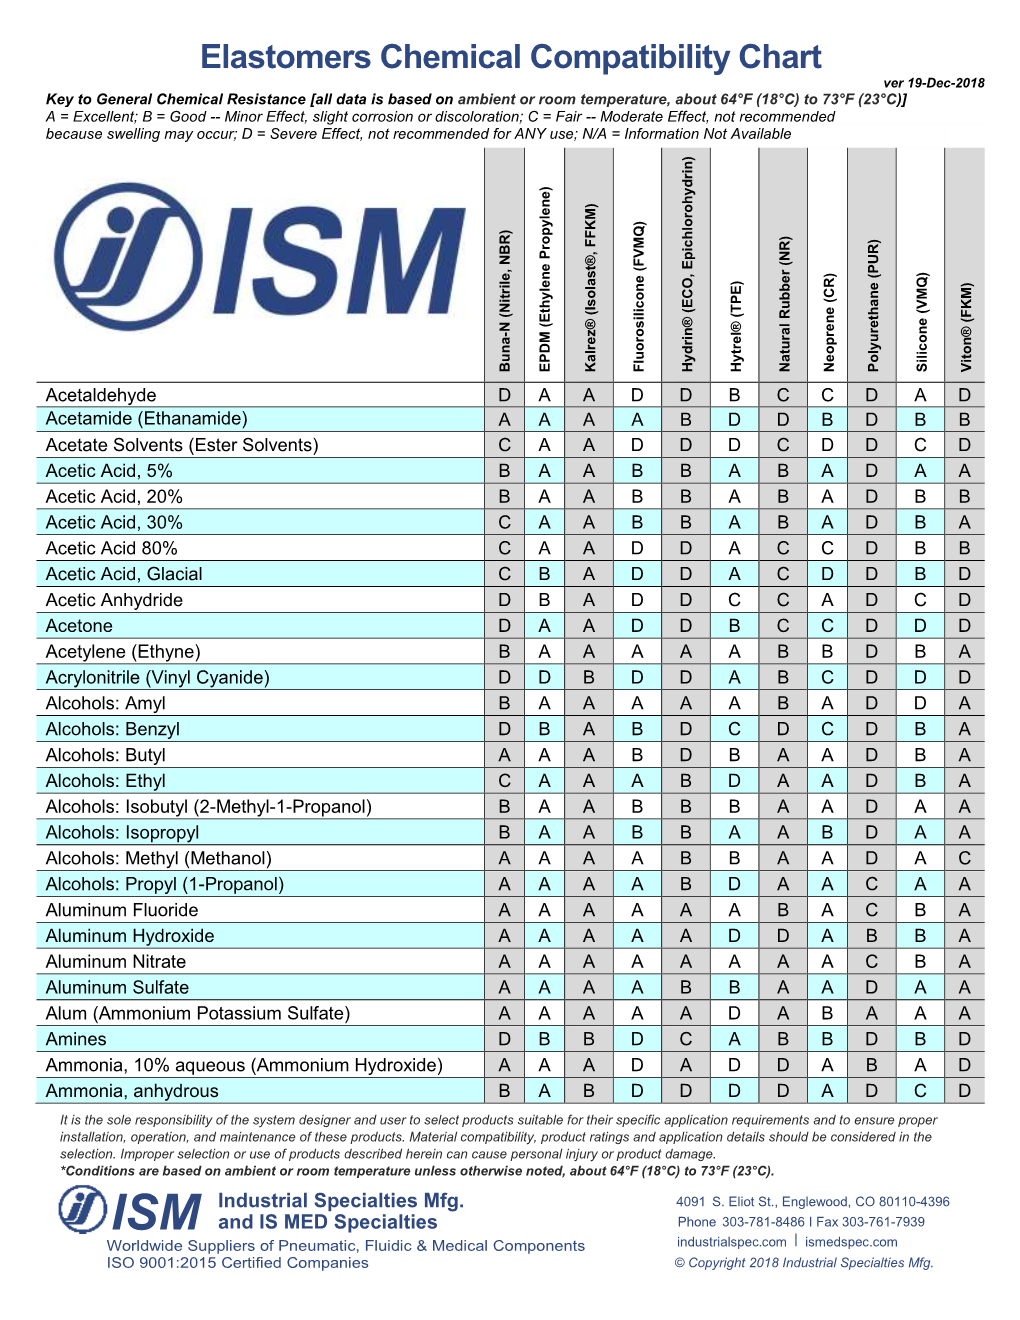 Elastomers Chemical Compatibility Chart From